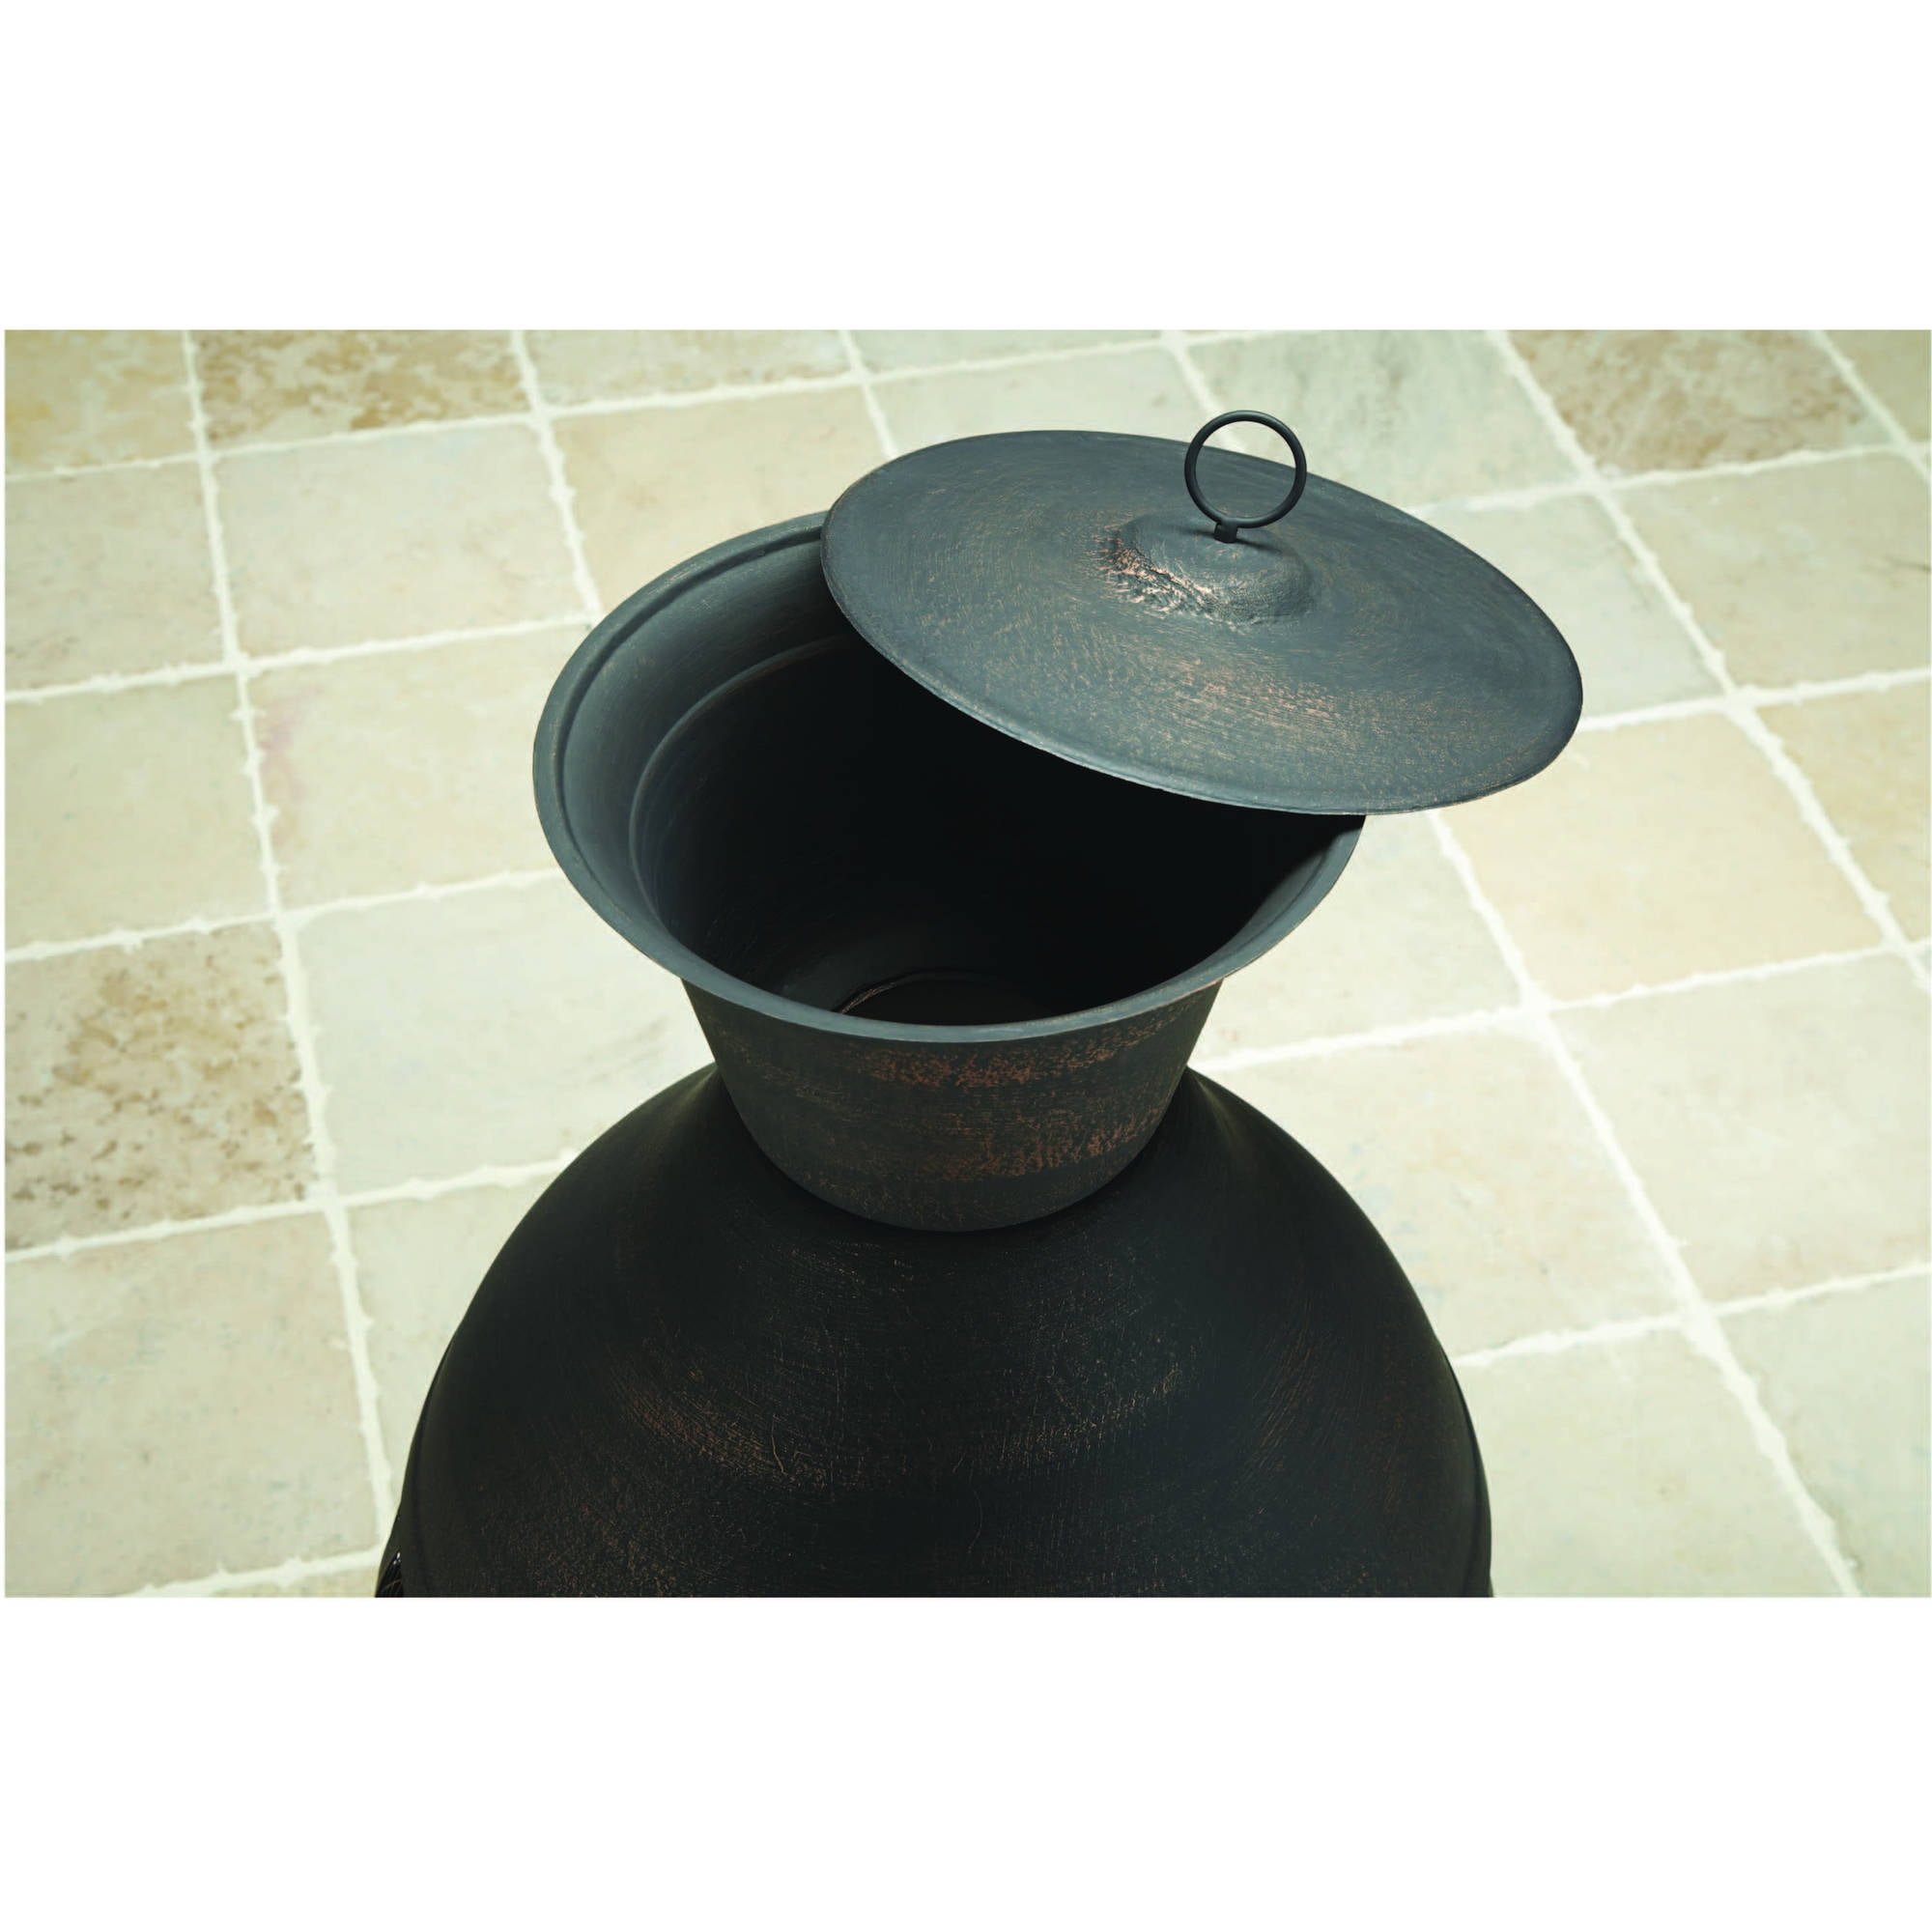 Antique Bronze 360-Degree View Of Fire 360-Degree View Of Fire Big Size Poker Included Cast Iron Chiminea With Nylon Cover Dimensions 22.8Lx22.8Wx45.7H 